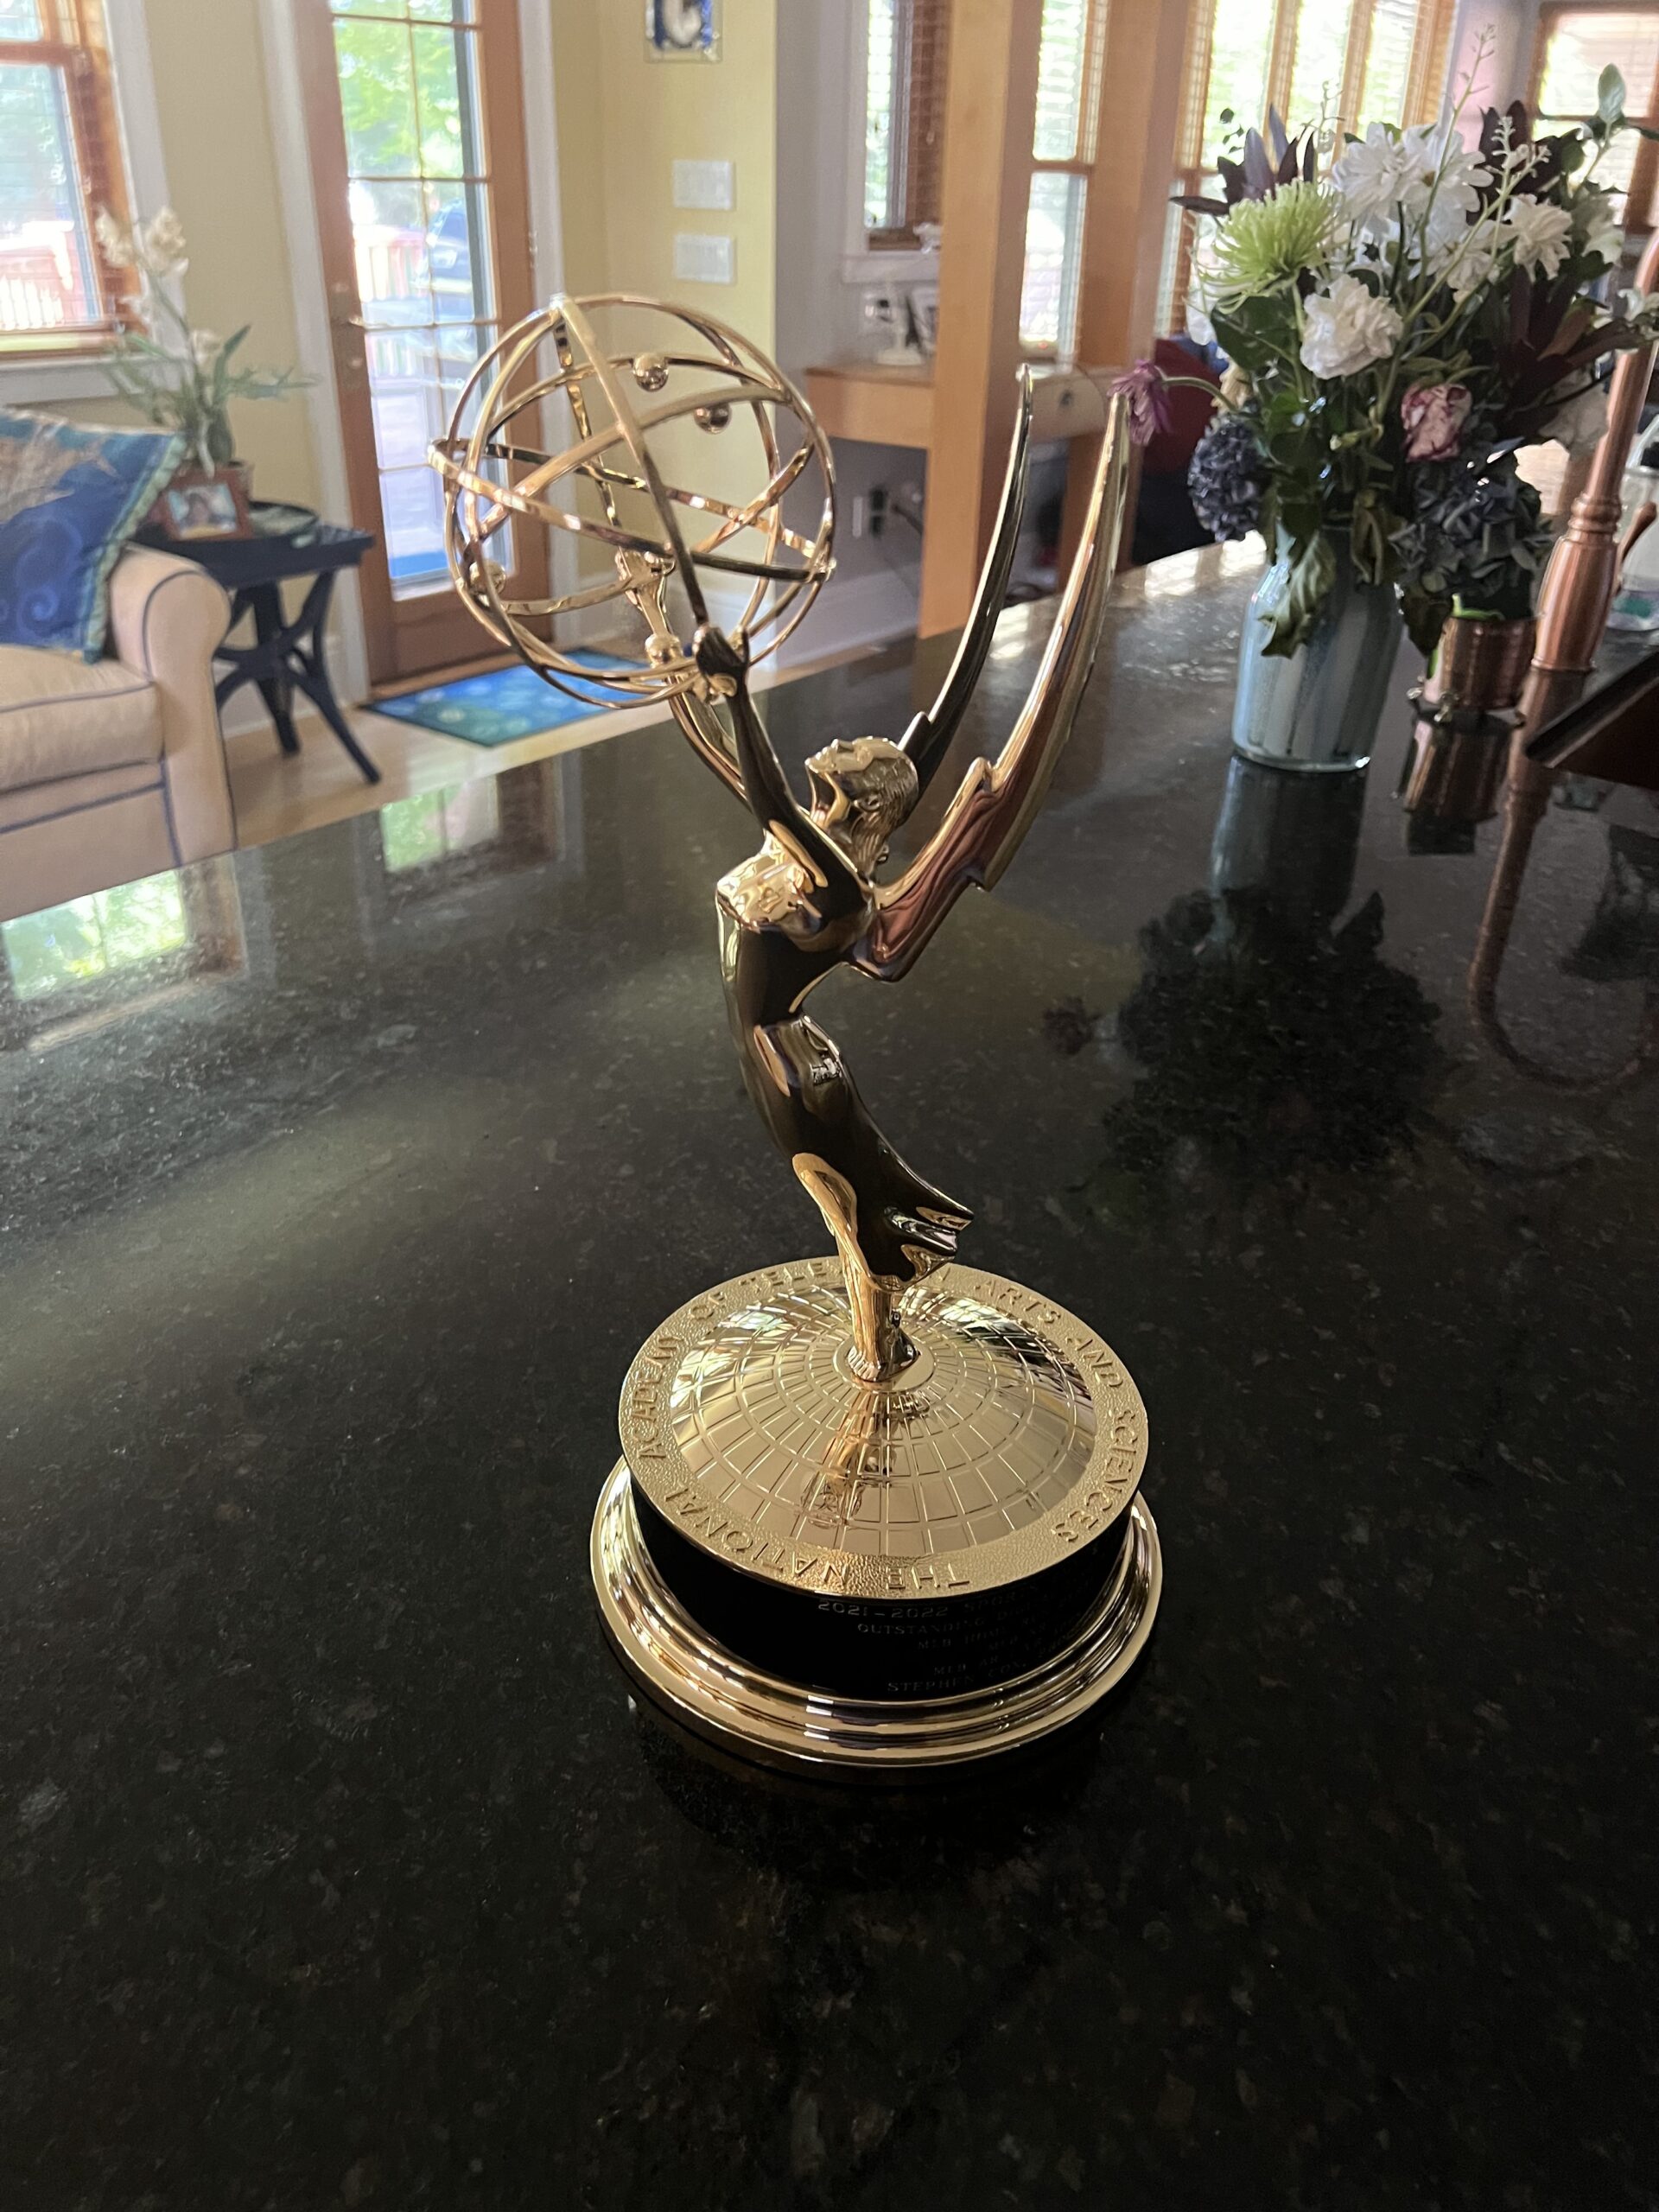 Sag Harbor resident Steve Cox won a Sports Emmy for Outstanding Digital Innovation for the work he did with MLB XR (Extended Reality) as part of the league's Home Run Derby broadcast.